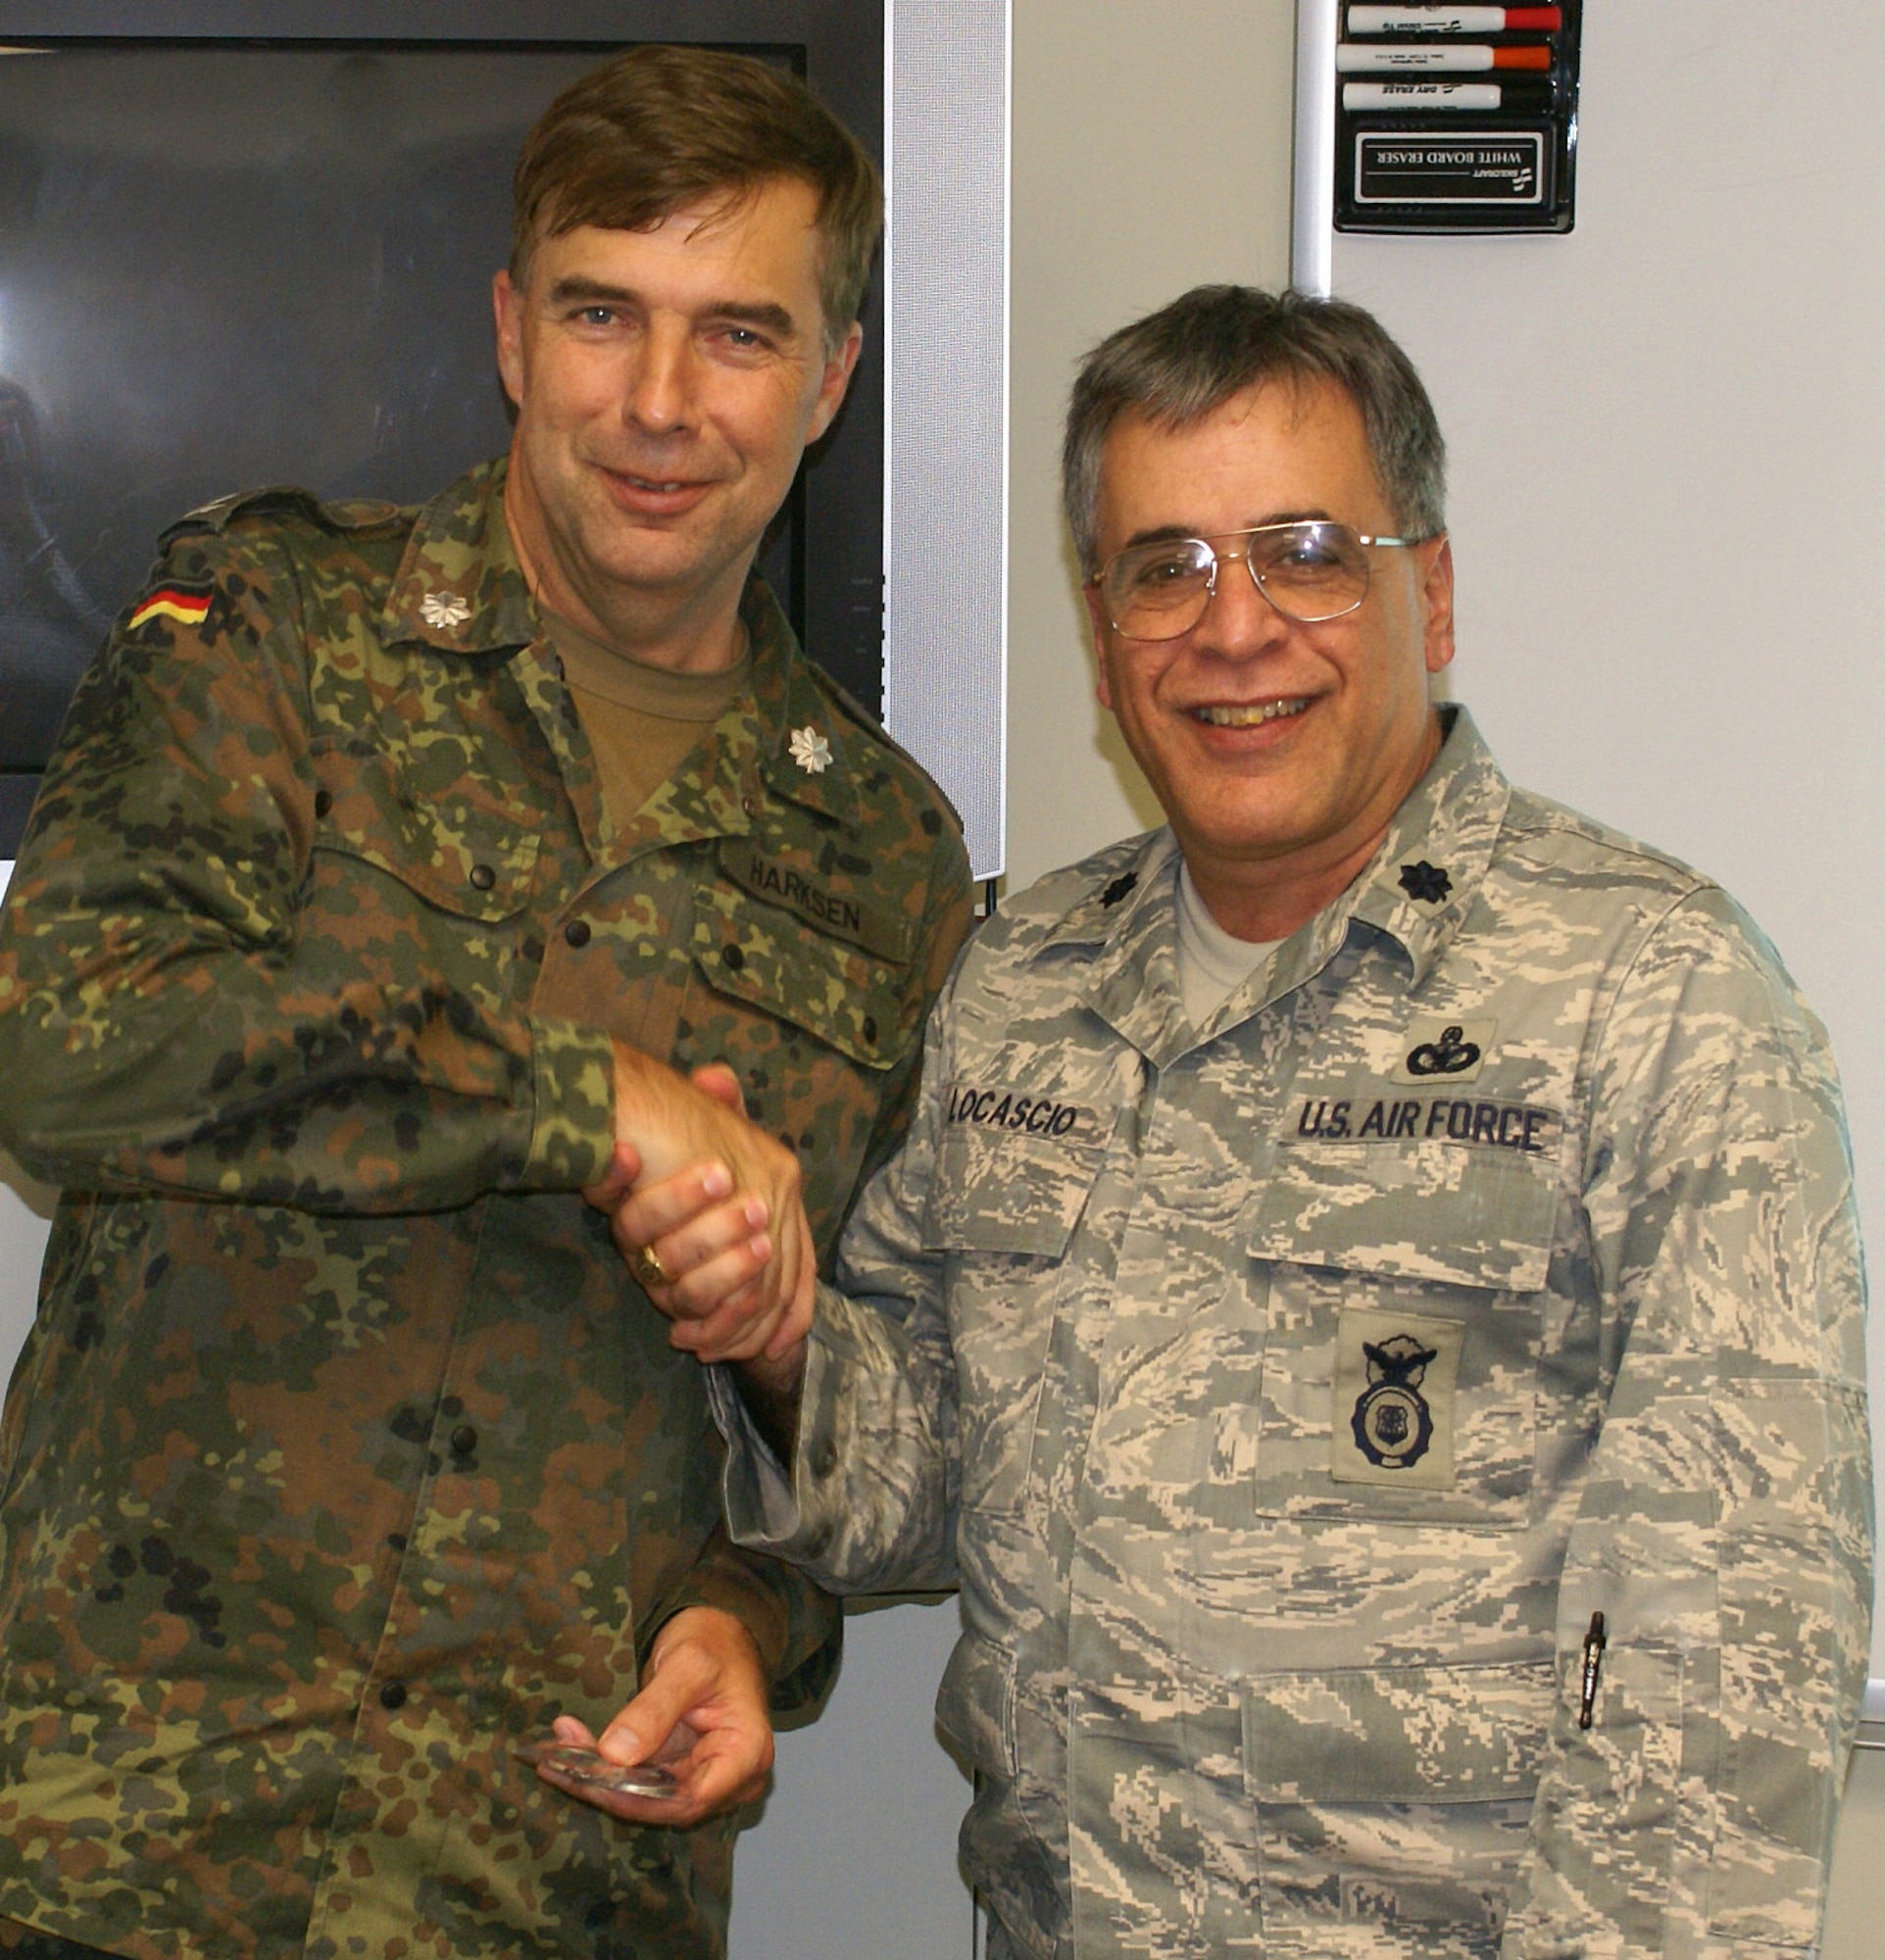 HOMESTEAD AIR RESERVE BASE, Fla. - Lt. Col.  Frank Locascio, 482nd Security Forces Squadron commander, presents a coin to Lt. Col. Christoph Harksen (left), German Air Force Reserve security forces officer, after Colonel Harksen briefed 482nd SFS members about German reserve military forces. Colonel Harksen arrived at Homestead Air Reserve Base on June 14 and will depart on June 21 for a second week at Dobbins Air Force Base, Ga. The visit was through the United States/Germany Reserve Officer Exchange Program. (U.S. Air Force photo/Staff Sgt. Erik Hofmeyer)